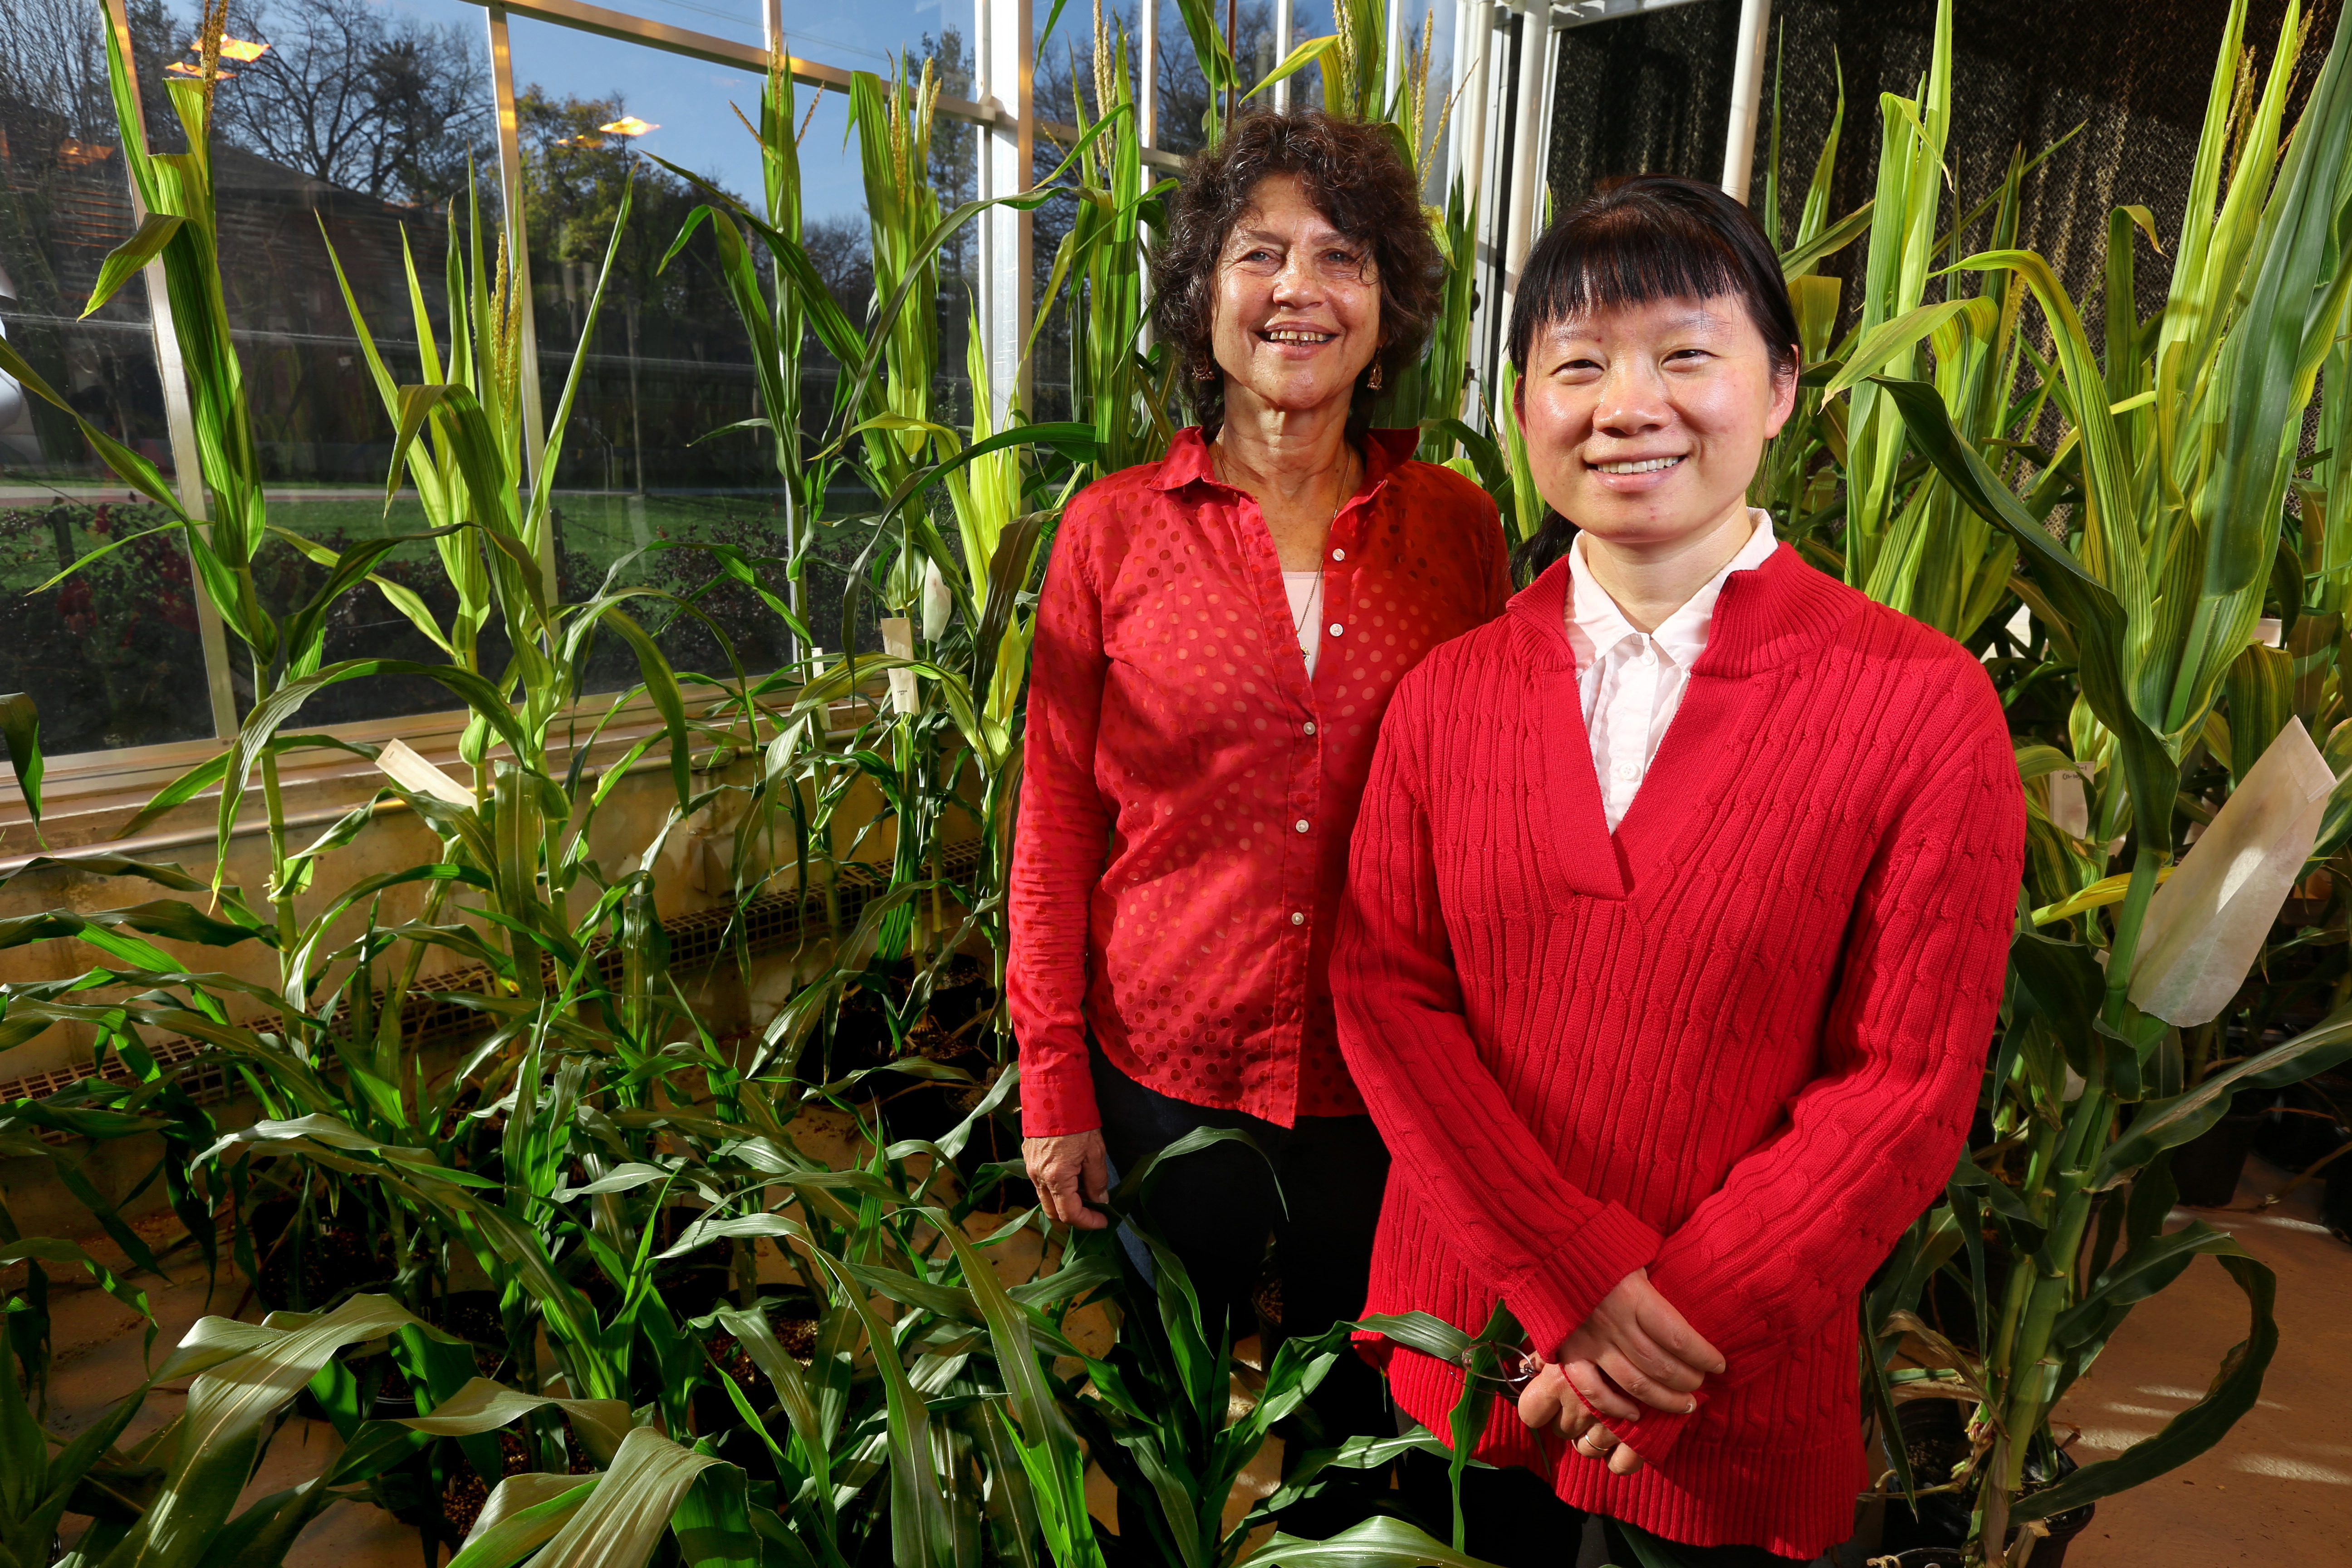 Researchers Wurtele and Ling standing among corn plants